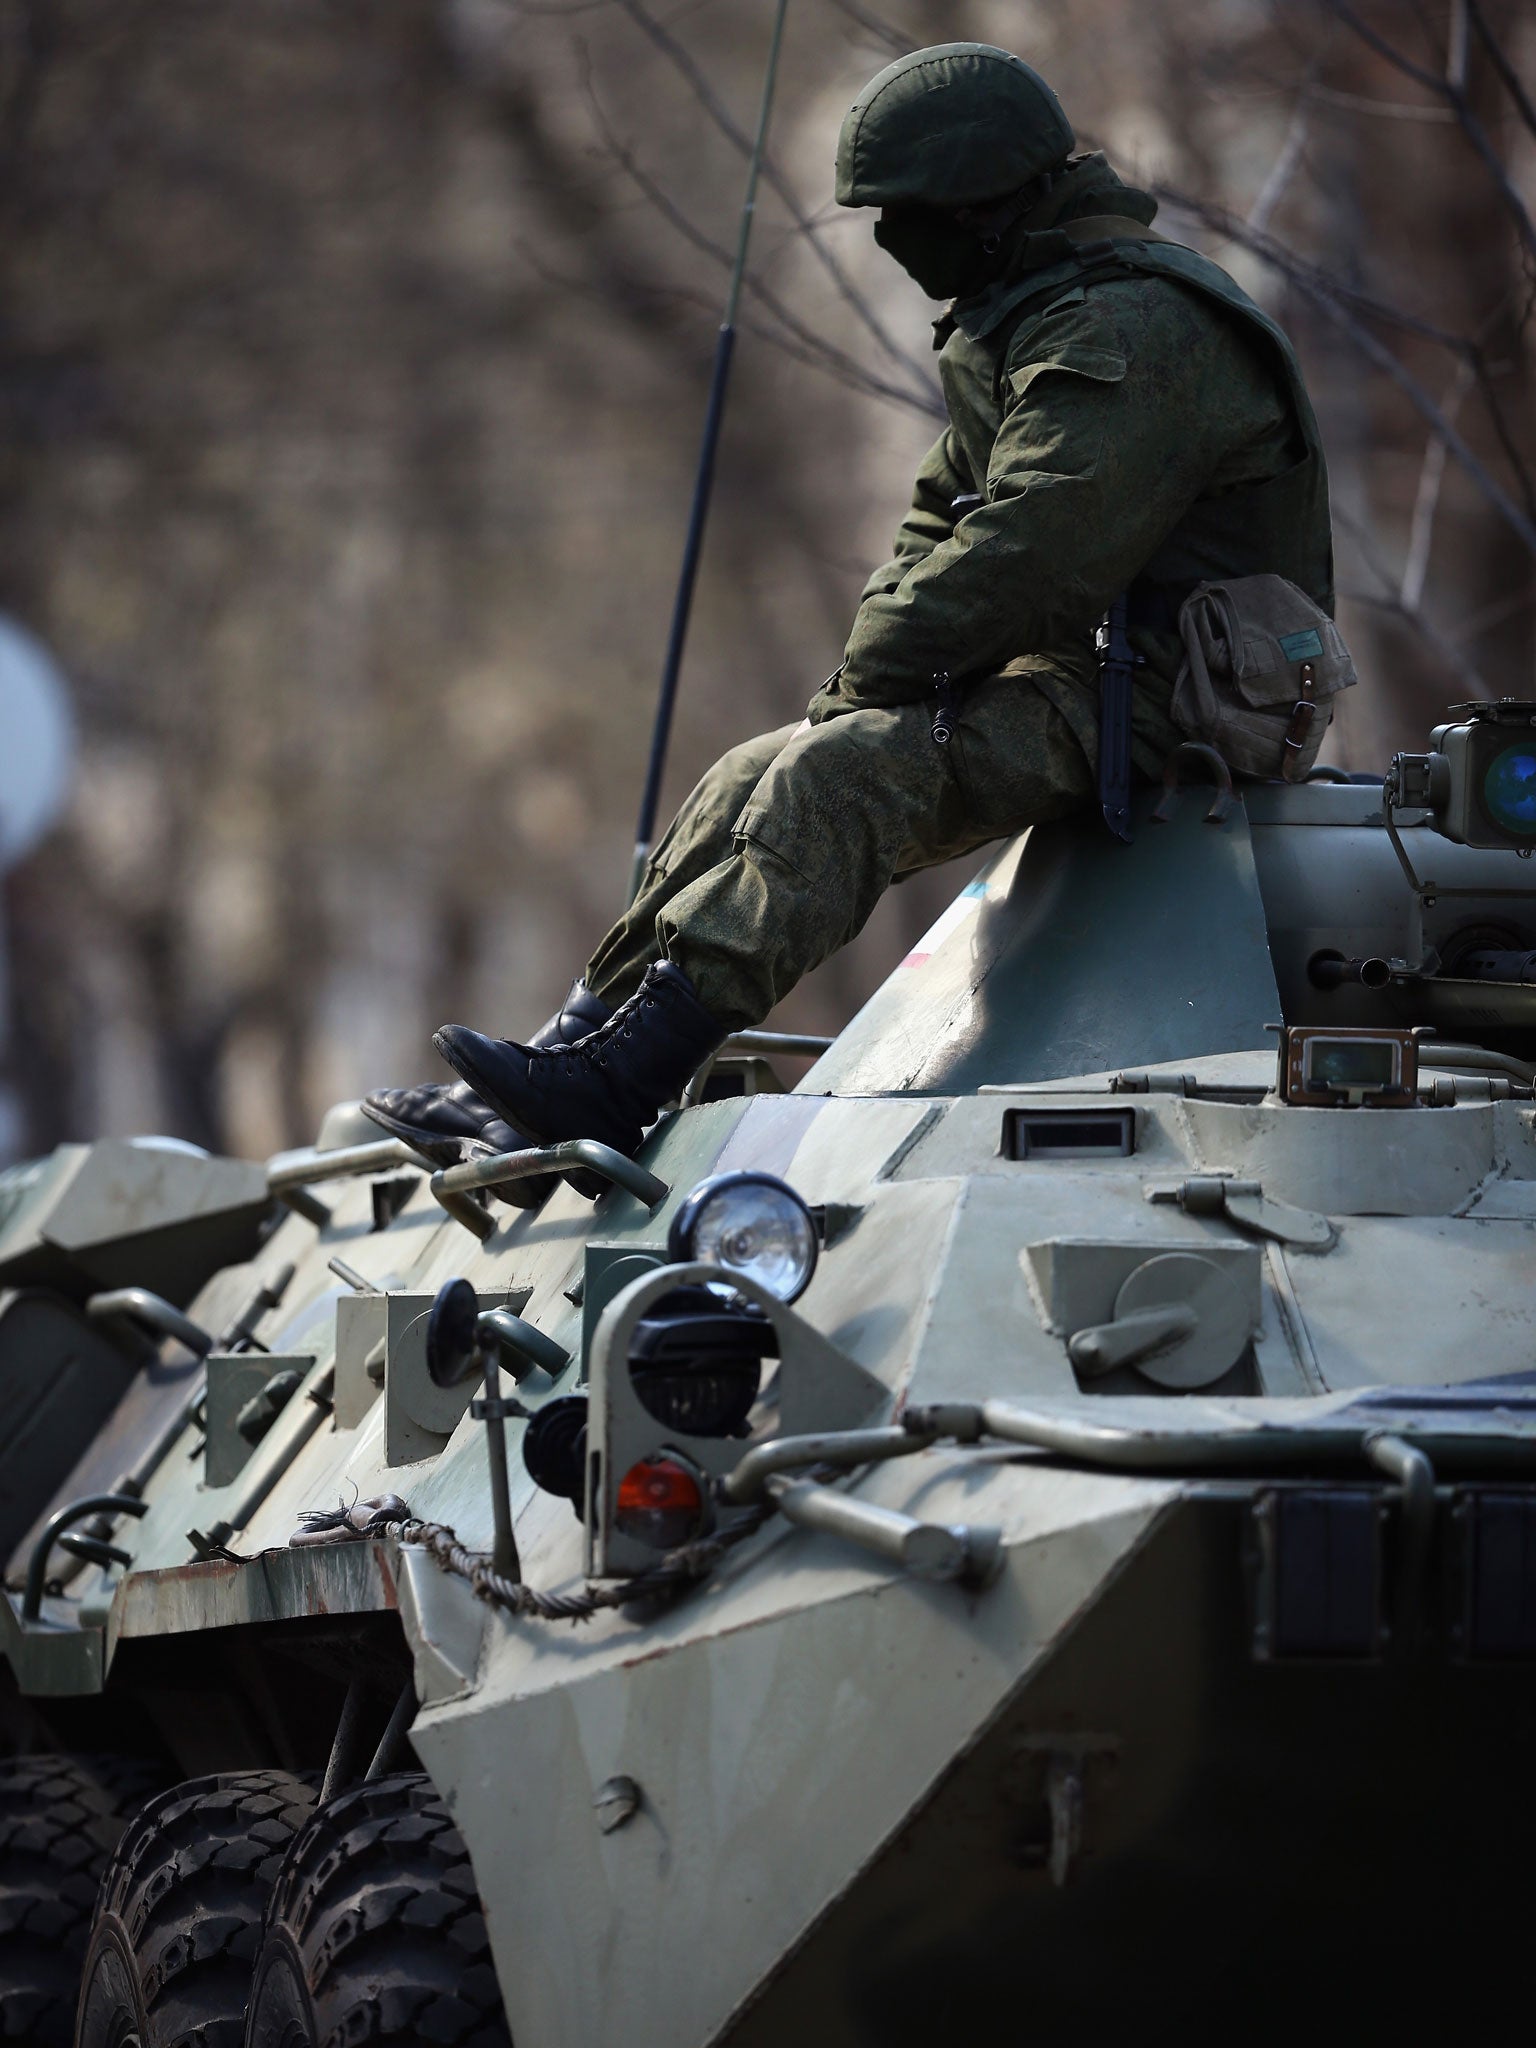 A Russian military man sits on top of a Russian military personnel carrier outside a Ukrainian military base on March 18, 2014 in Simferopol, Ukraine